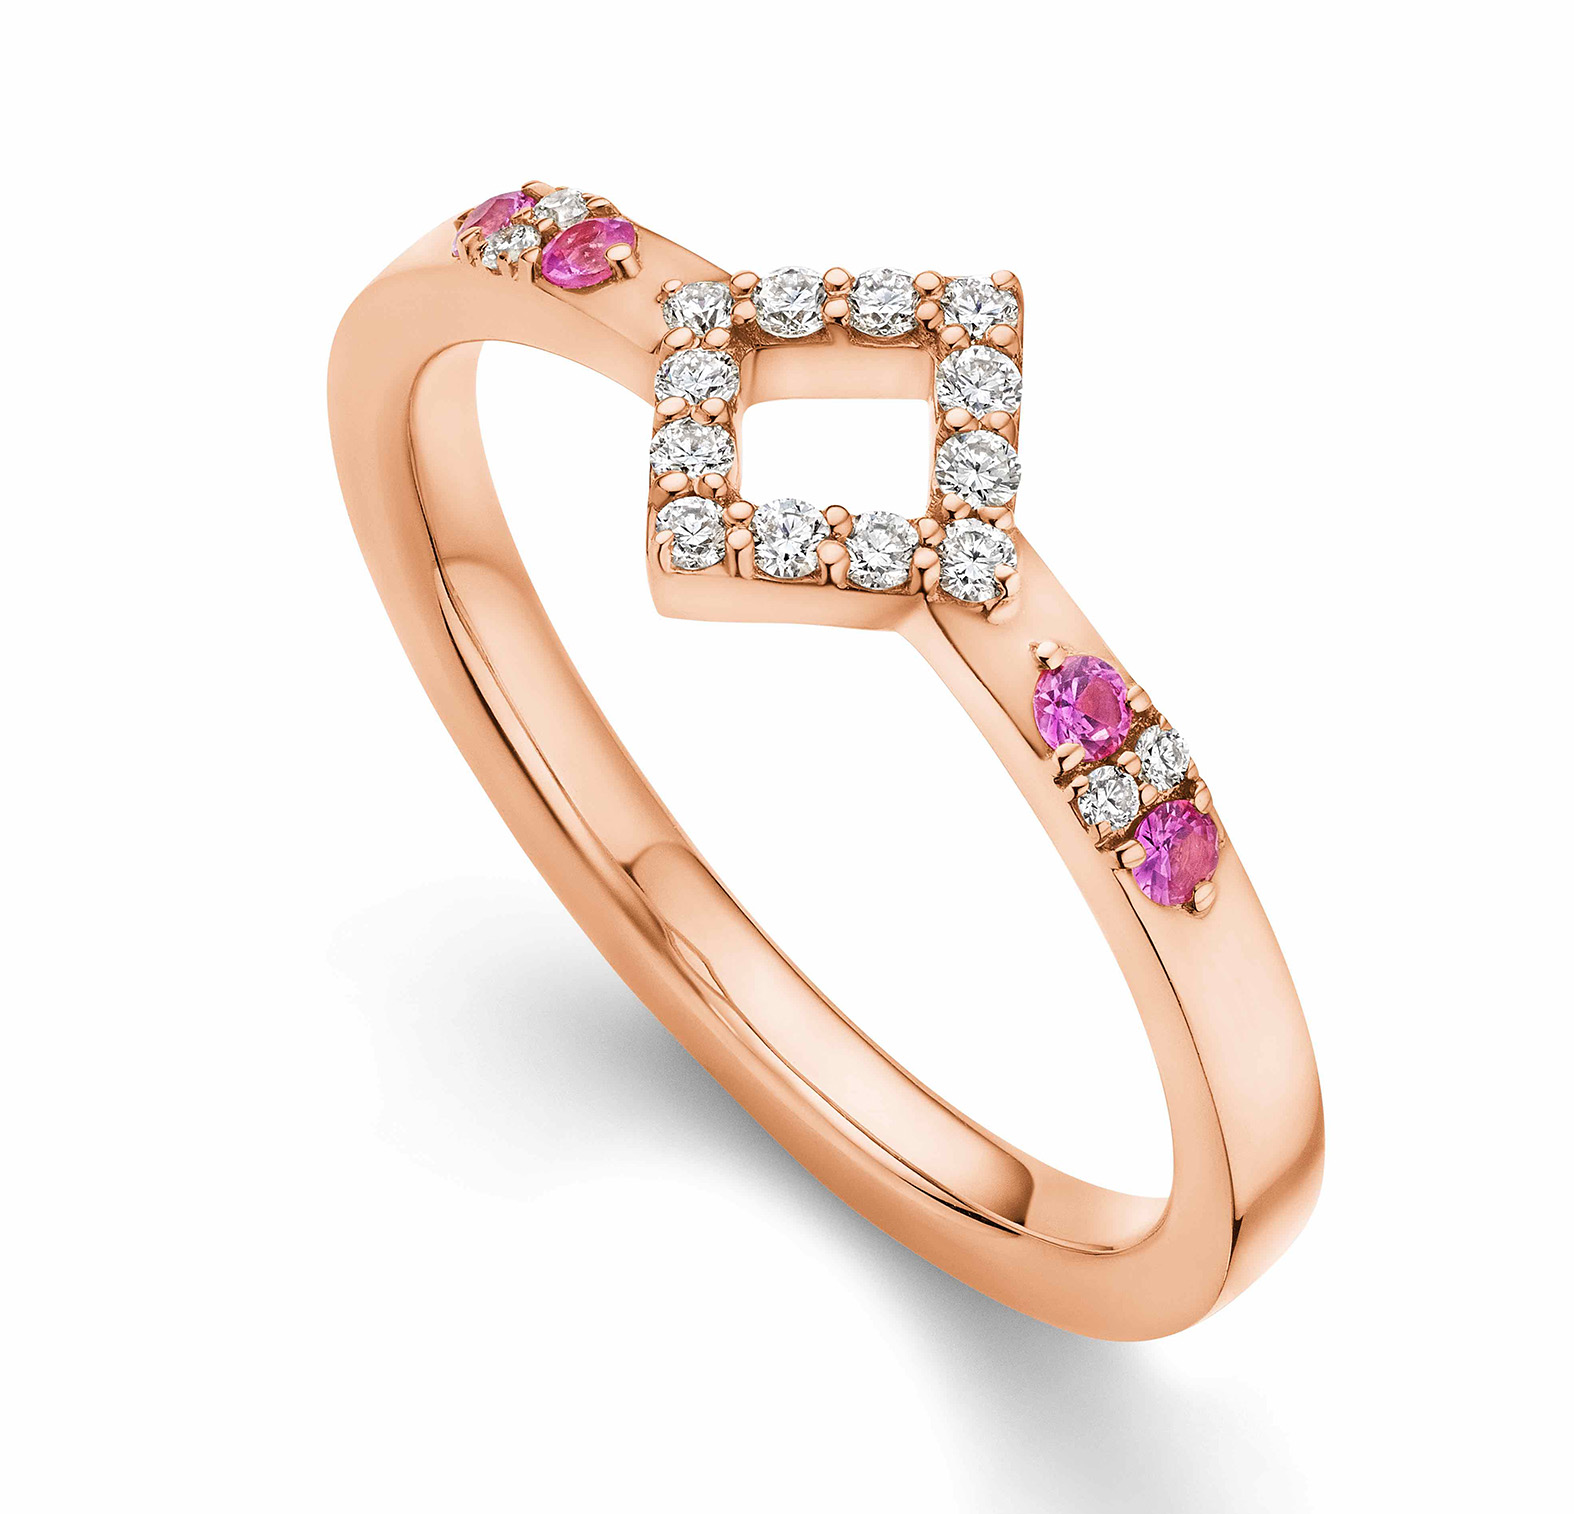 Whitney Center Stackable Diamond and Pink Sapphire Ring in Rose Gold, by Karina Brez